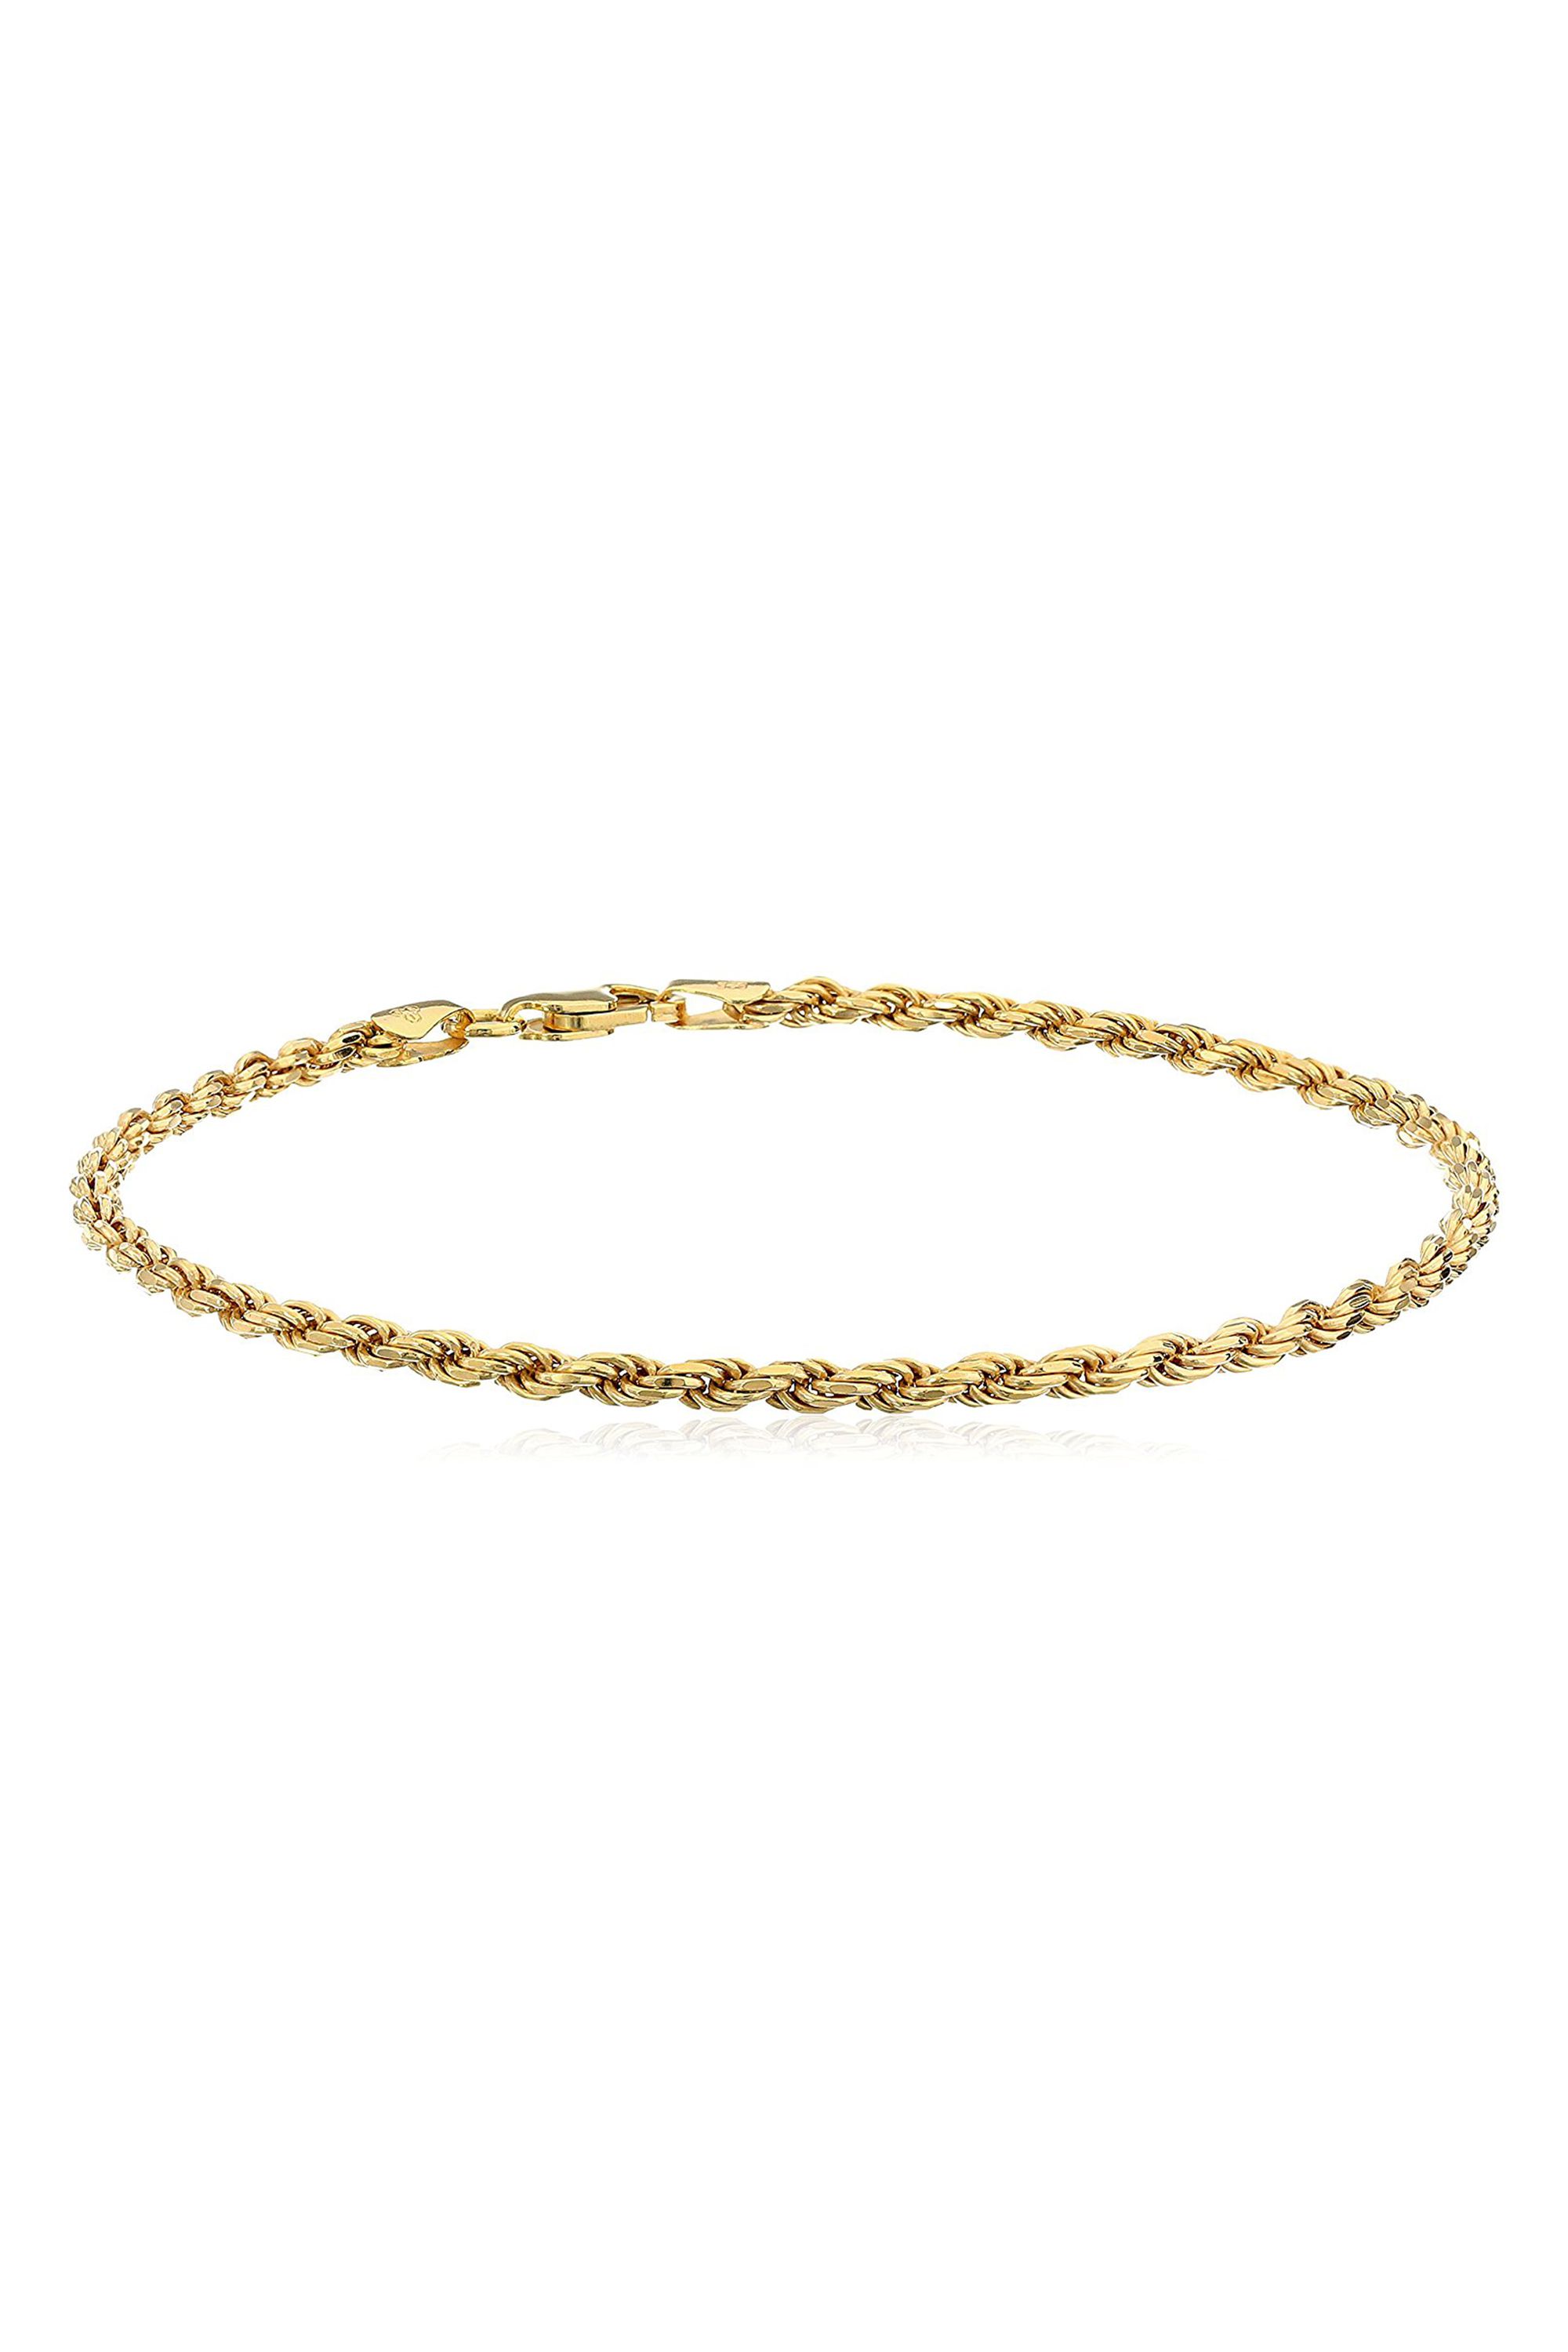 12 Gold Anklets You Can Wear Every Day- Why The Gold Anklet Bracelet is the  Accessory of Summer 2017